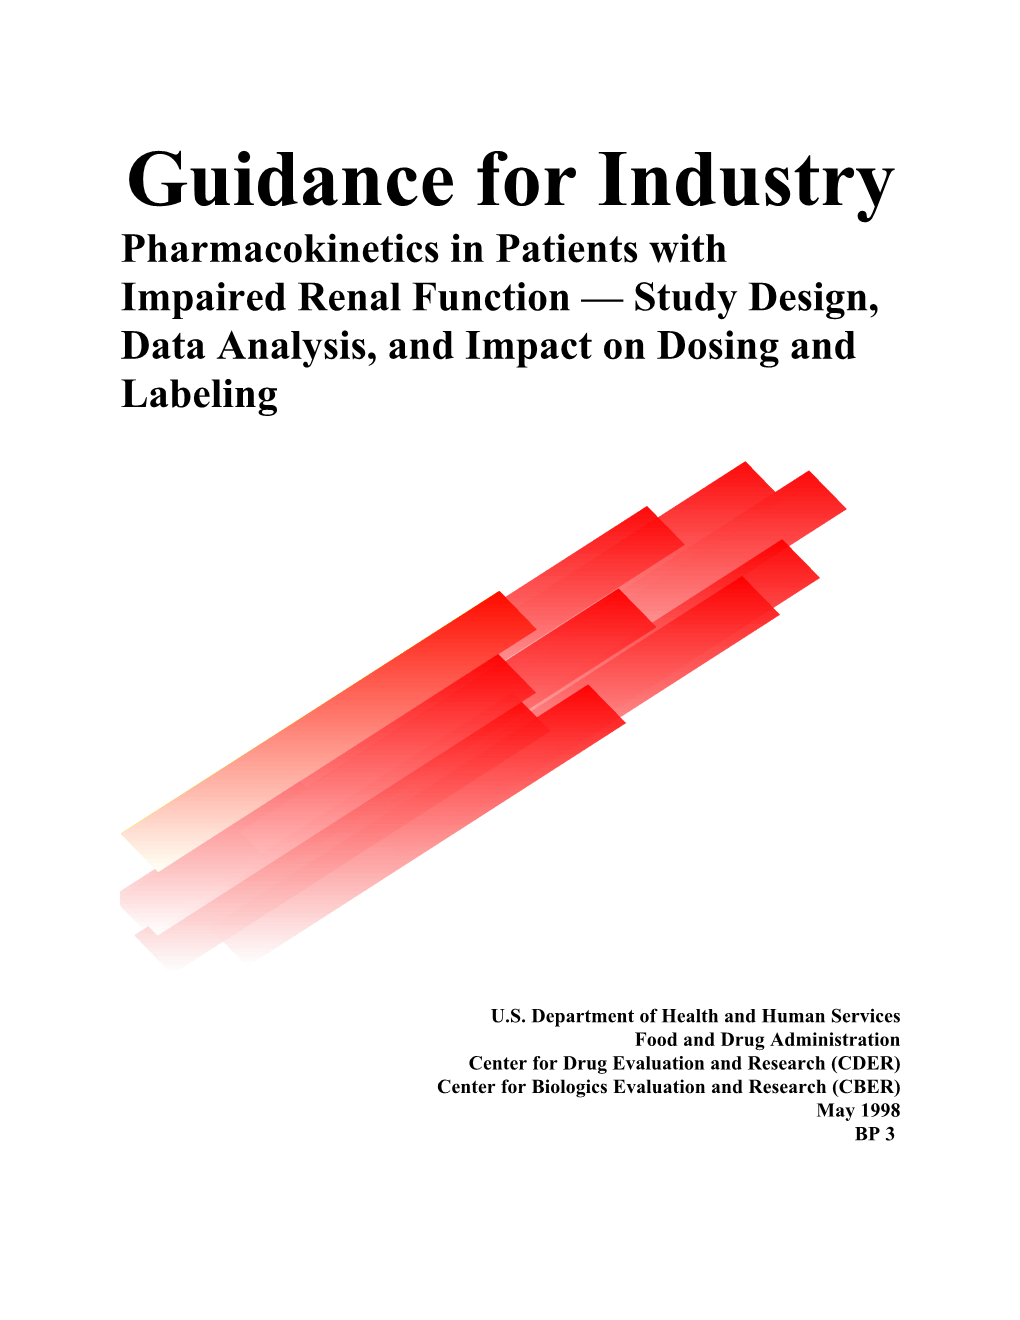 Guidance for Industry Pharmacokinetics in Patients with Impaired Renal Function — Study Design, Data Analysis, and Impact on Dosing and Labeling